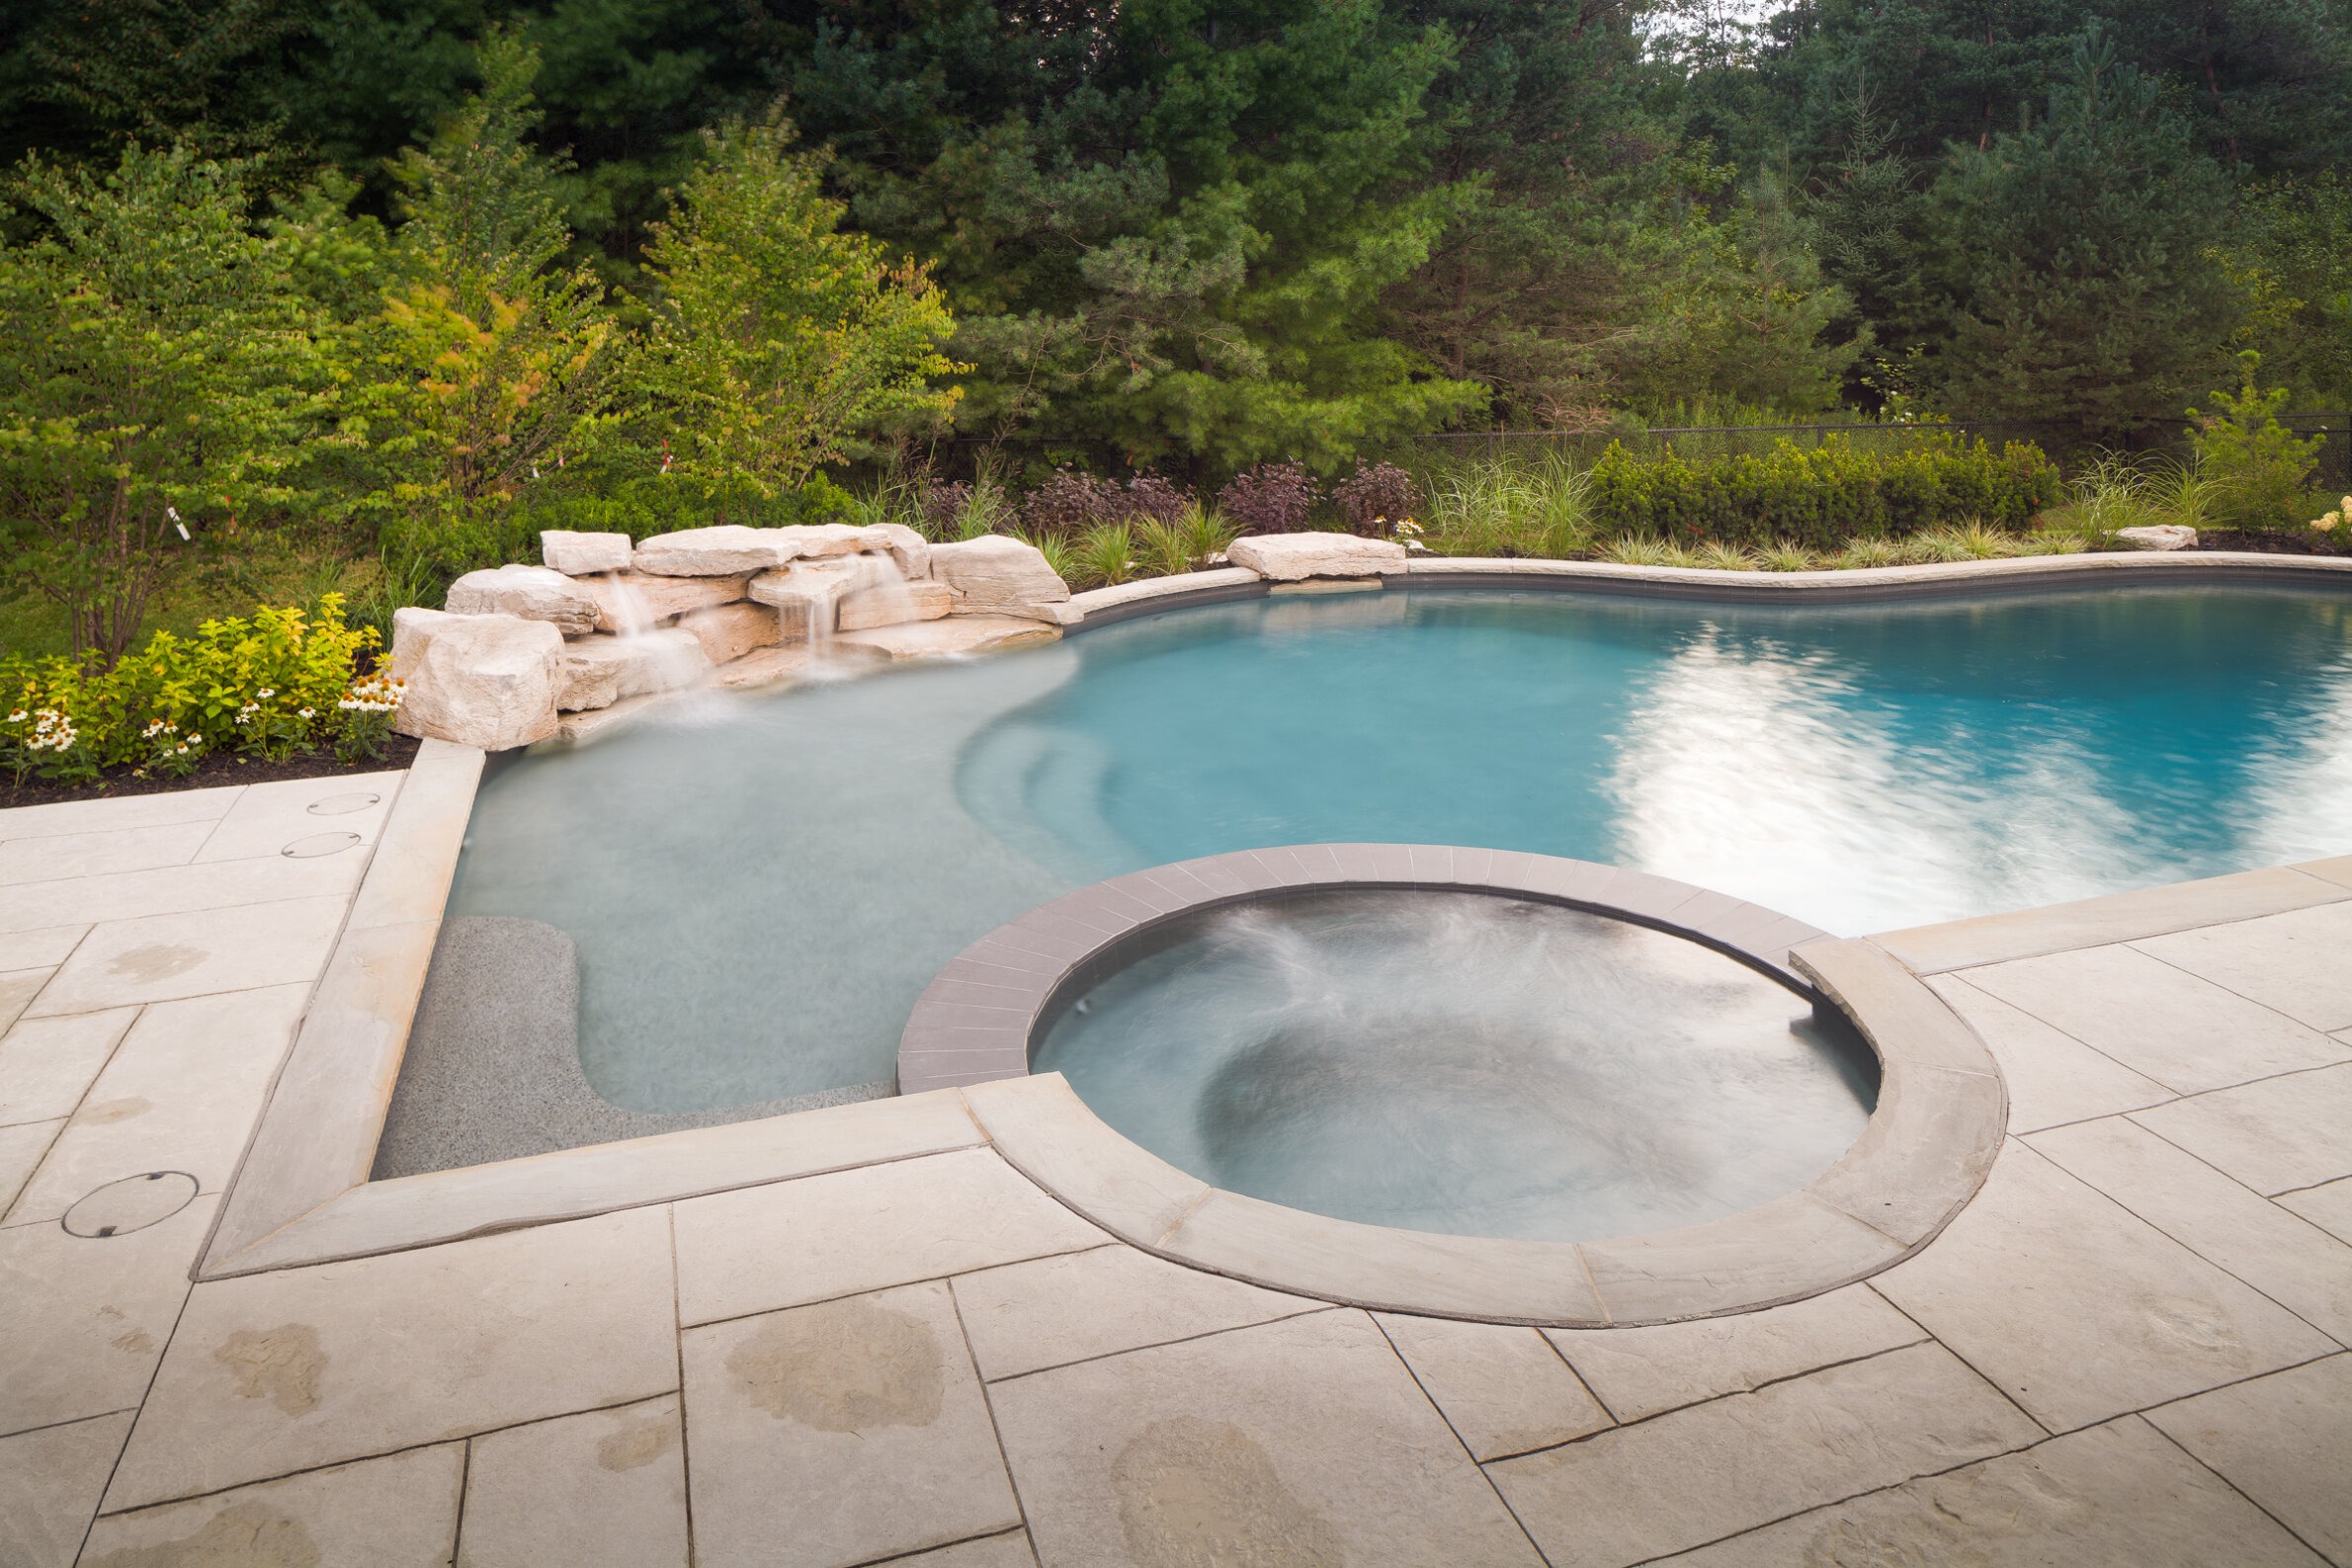 A serene backyard with a curved swimming pool beside a hot tub, featuring a natural rock waterfall, surrounded by lush greenery and a stone deck.